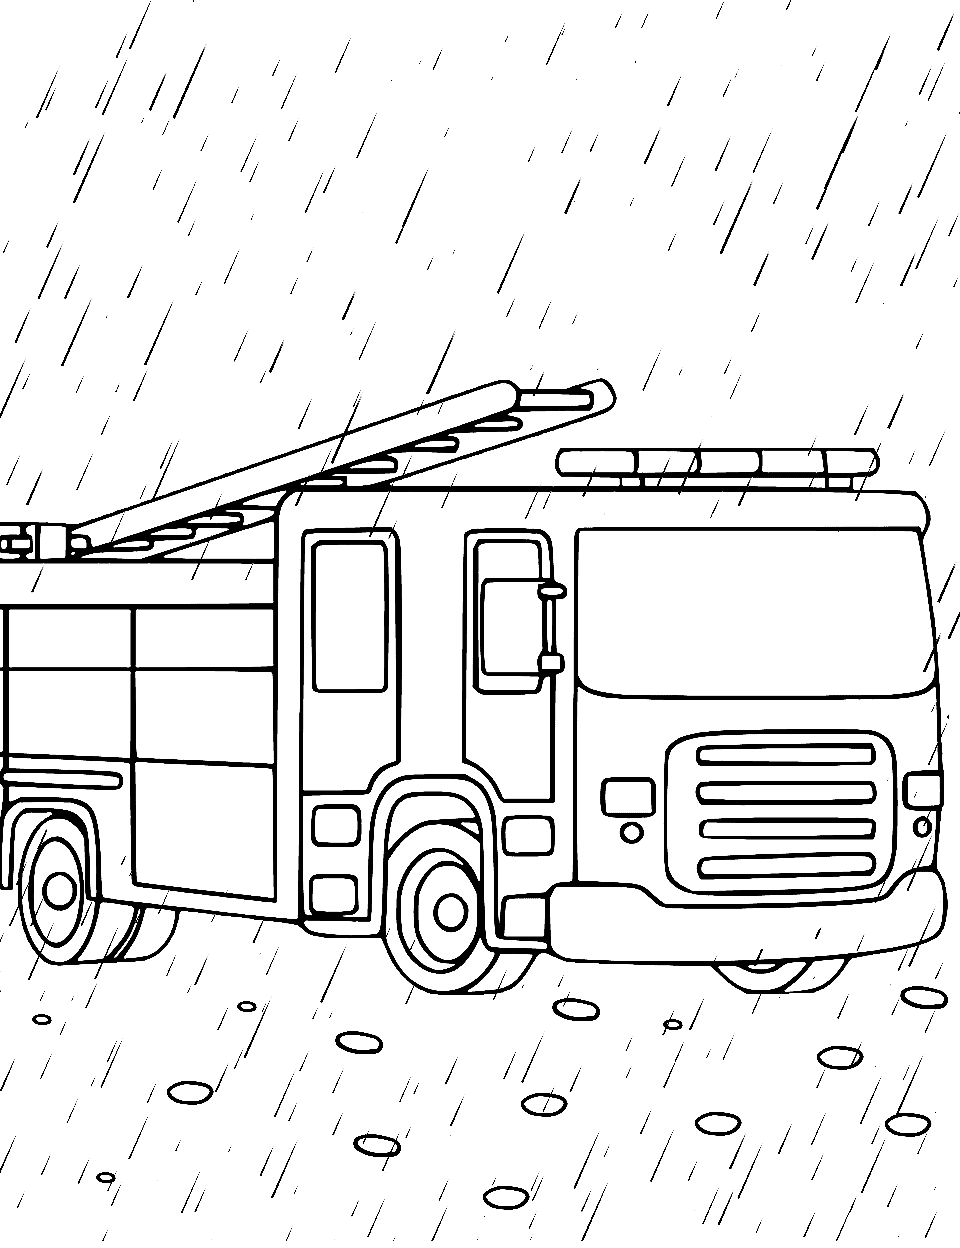 Fire Truck in the Rain Coloring Page - A fire truck out in the rain, with puddles around.